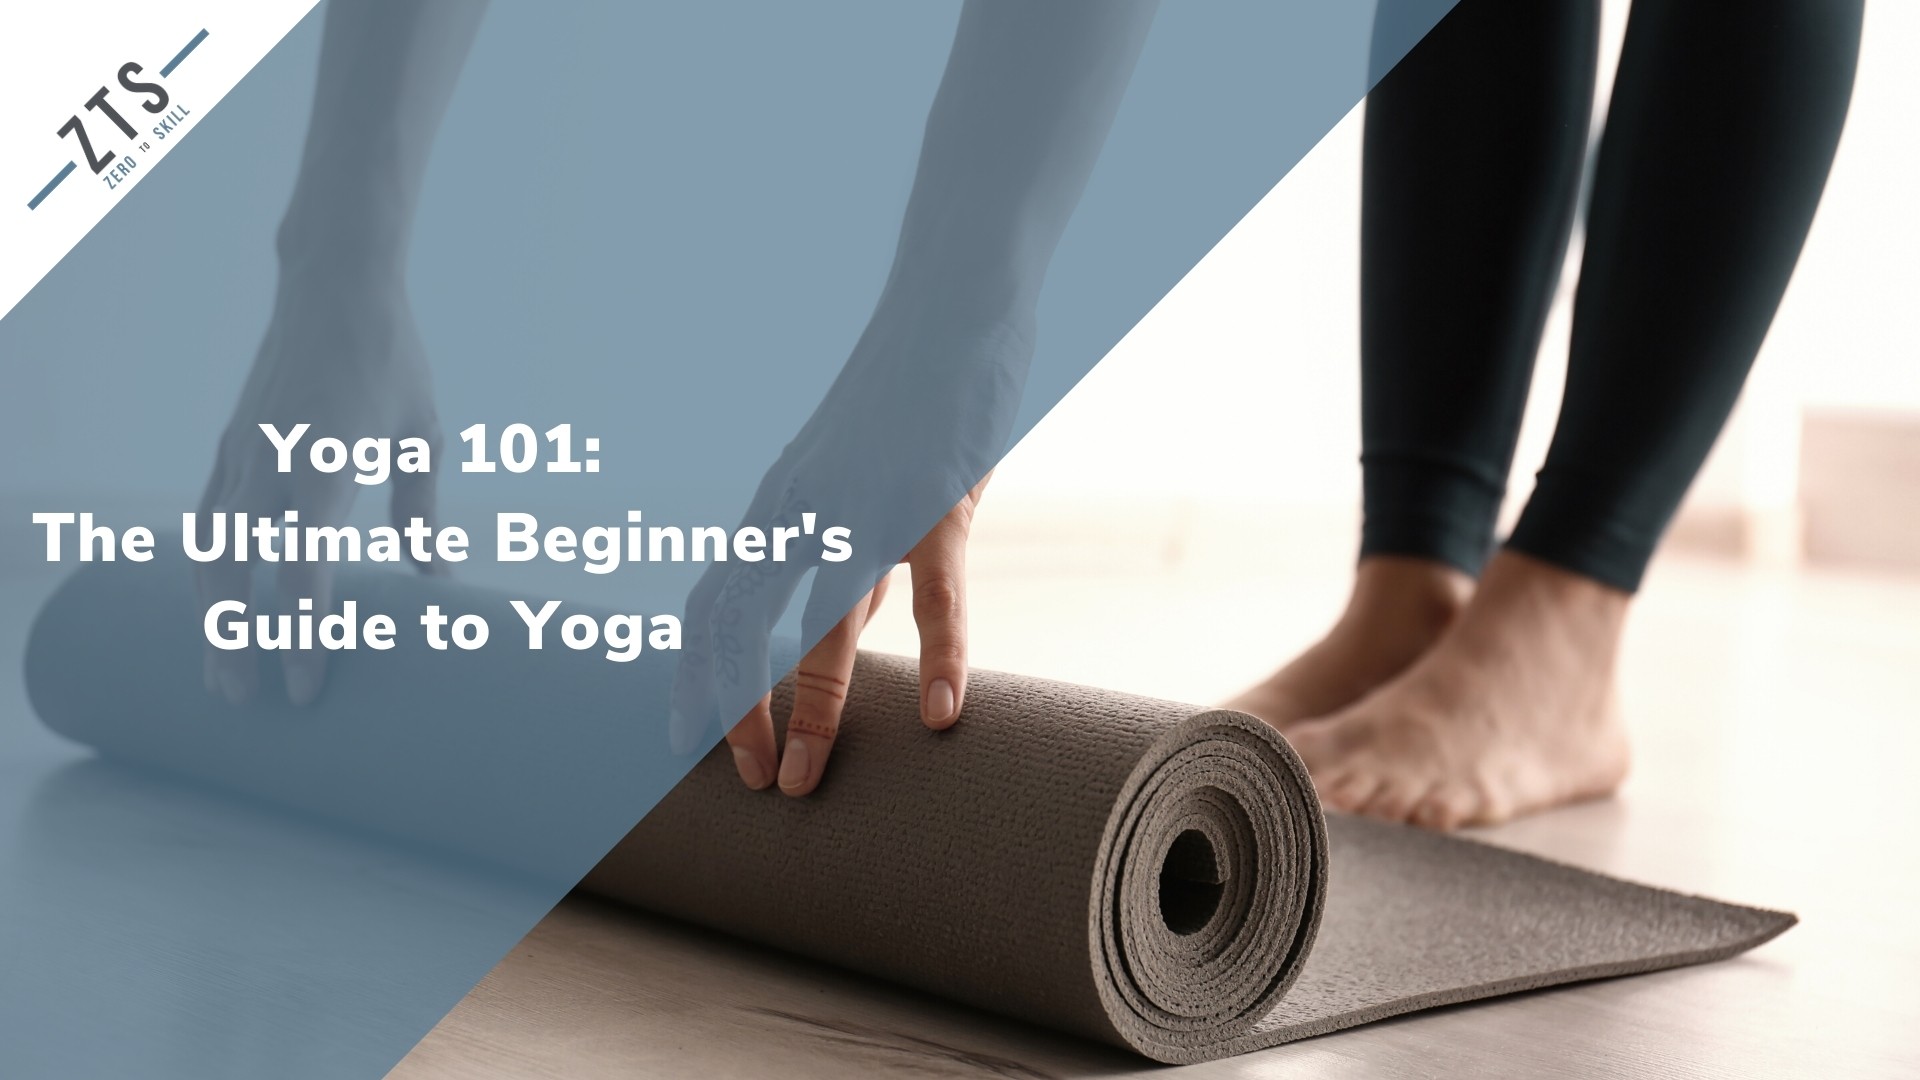 Yoga 101: The Ultimate Beginner's Guide to Yoga